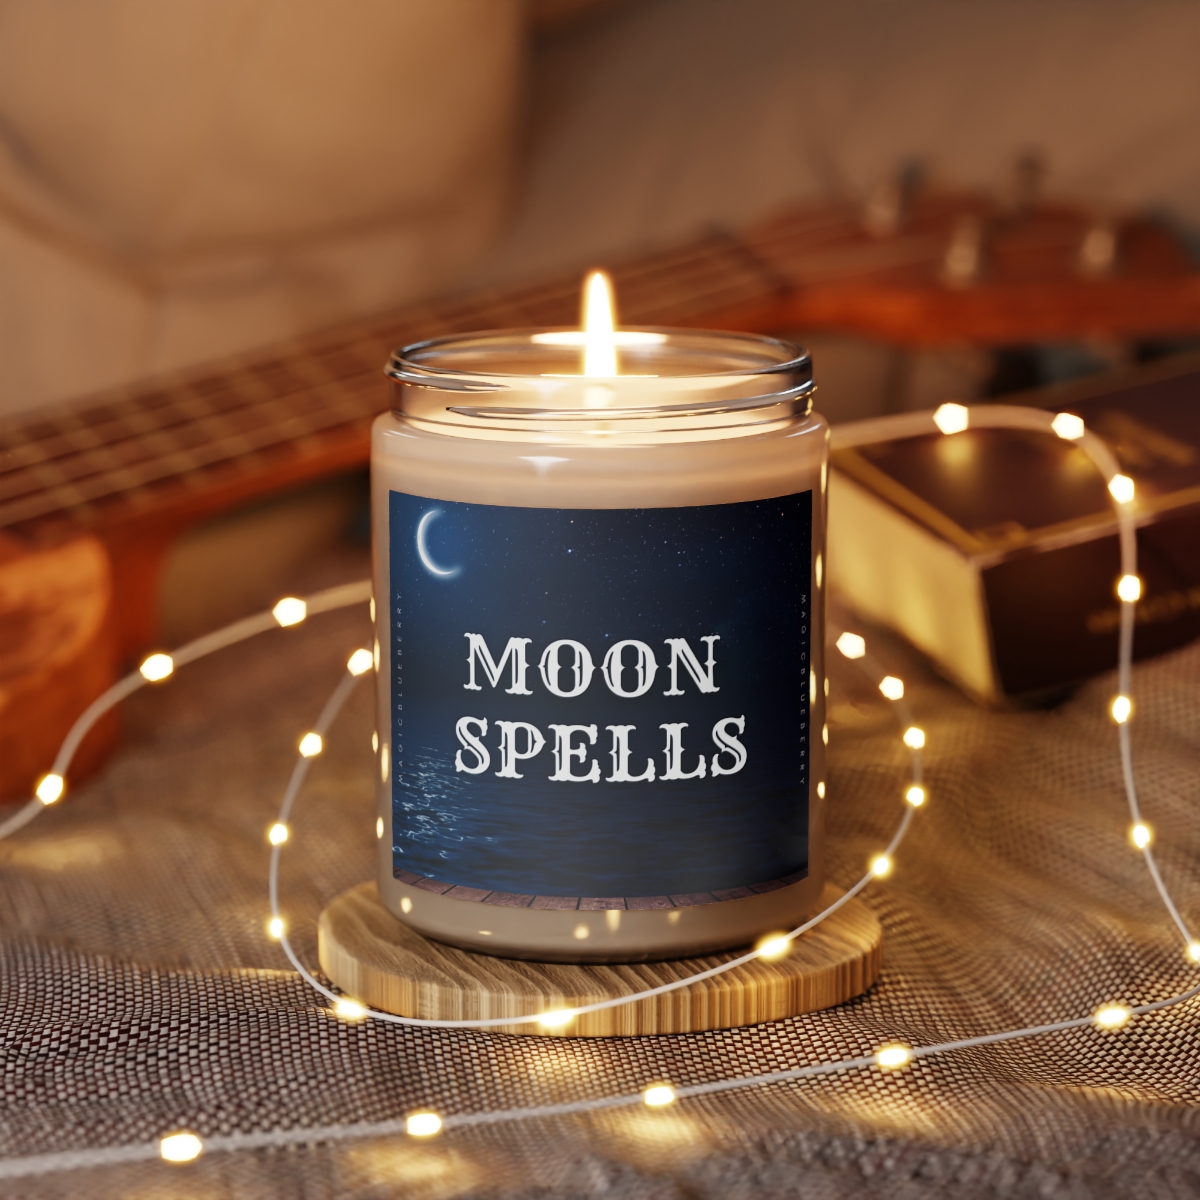 Midnight Moon Spells - Scented Soy Wax Candle | Clear Moon Jar | Manifestation Spell Candle Jar | Coconut Soy Candle 9oz | Aromatherapy product main image